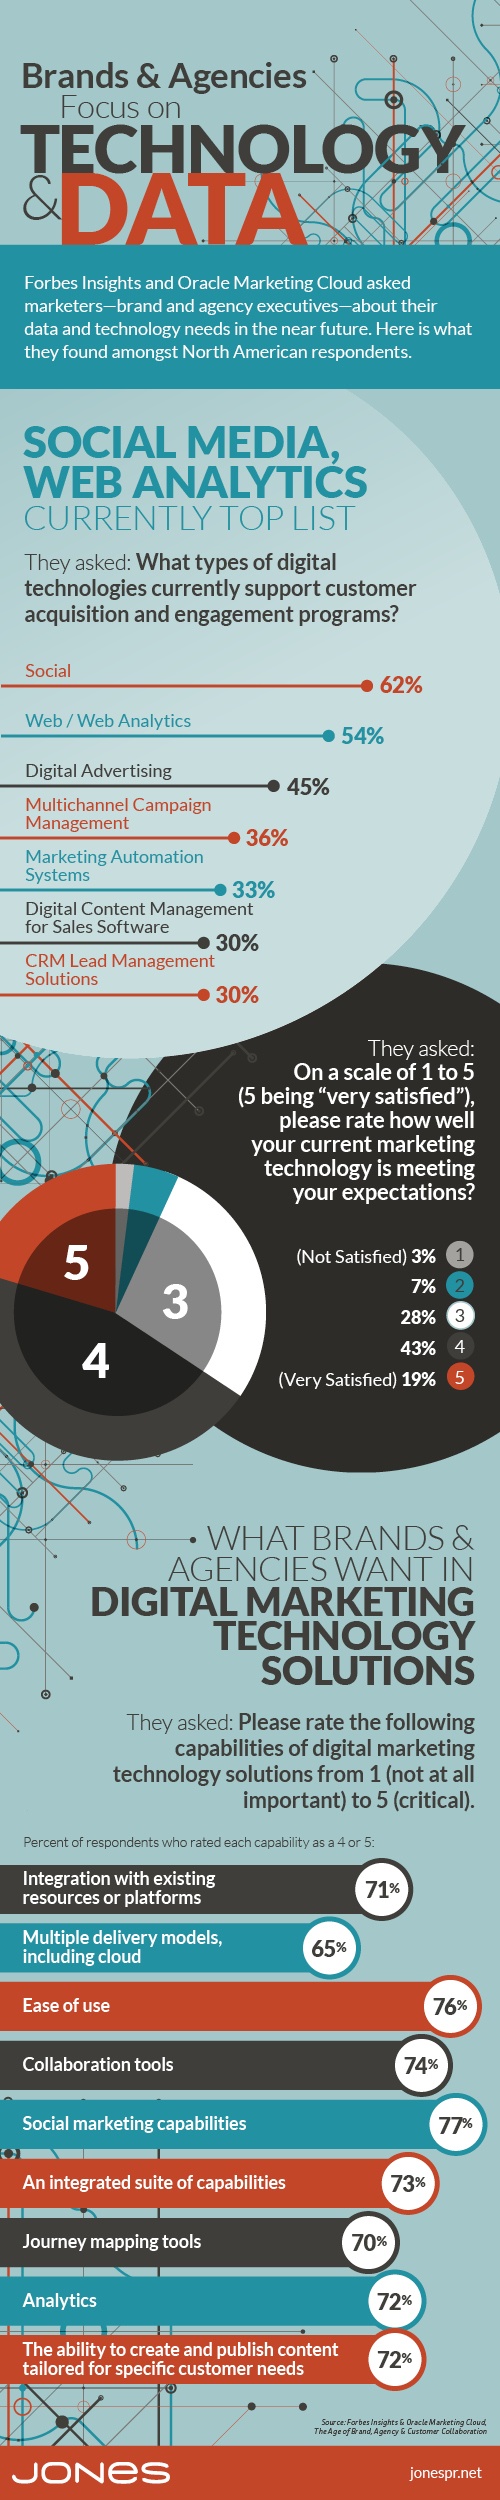 Top Technology Requests From Business Marketers (Infographic)